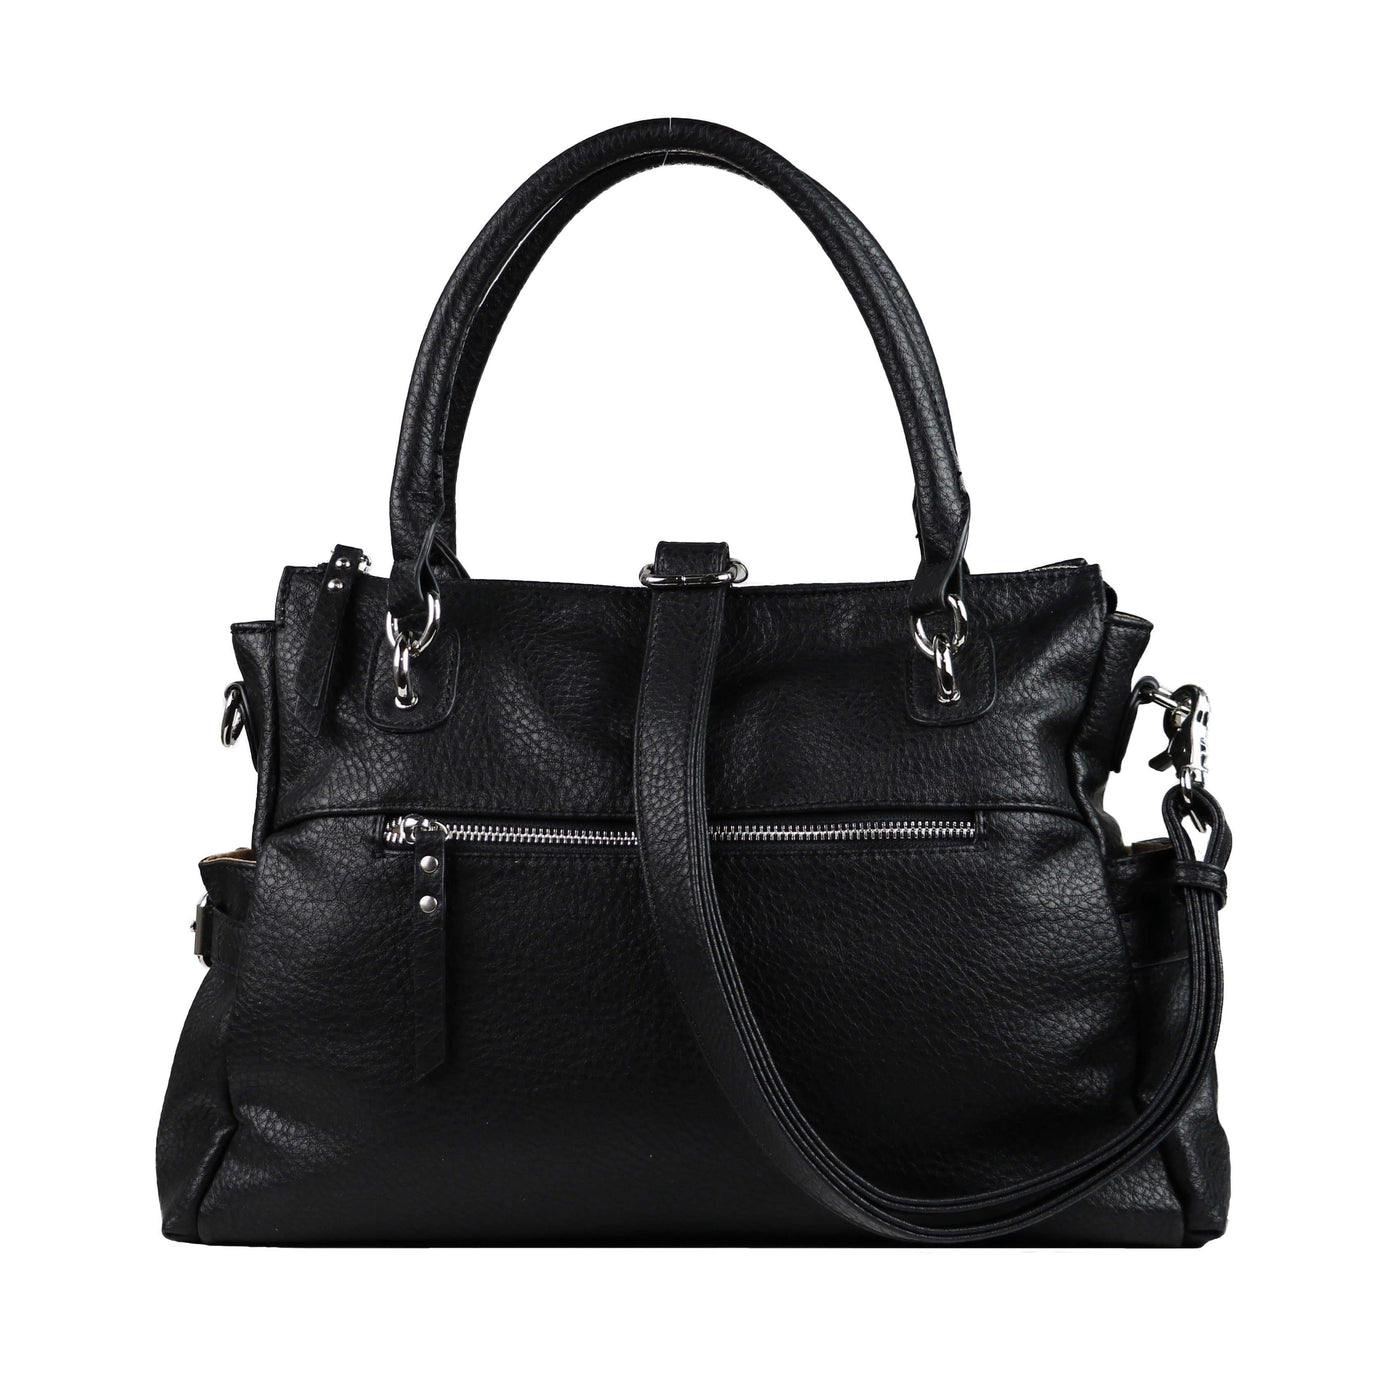 Concealed Carry Jessica Satchel Black by Lady Conceal